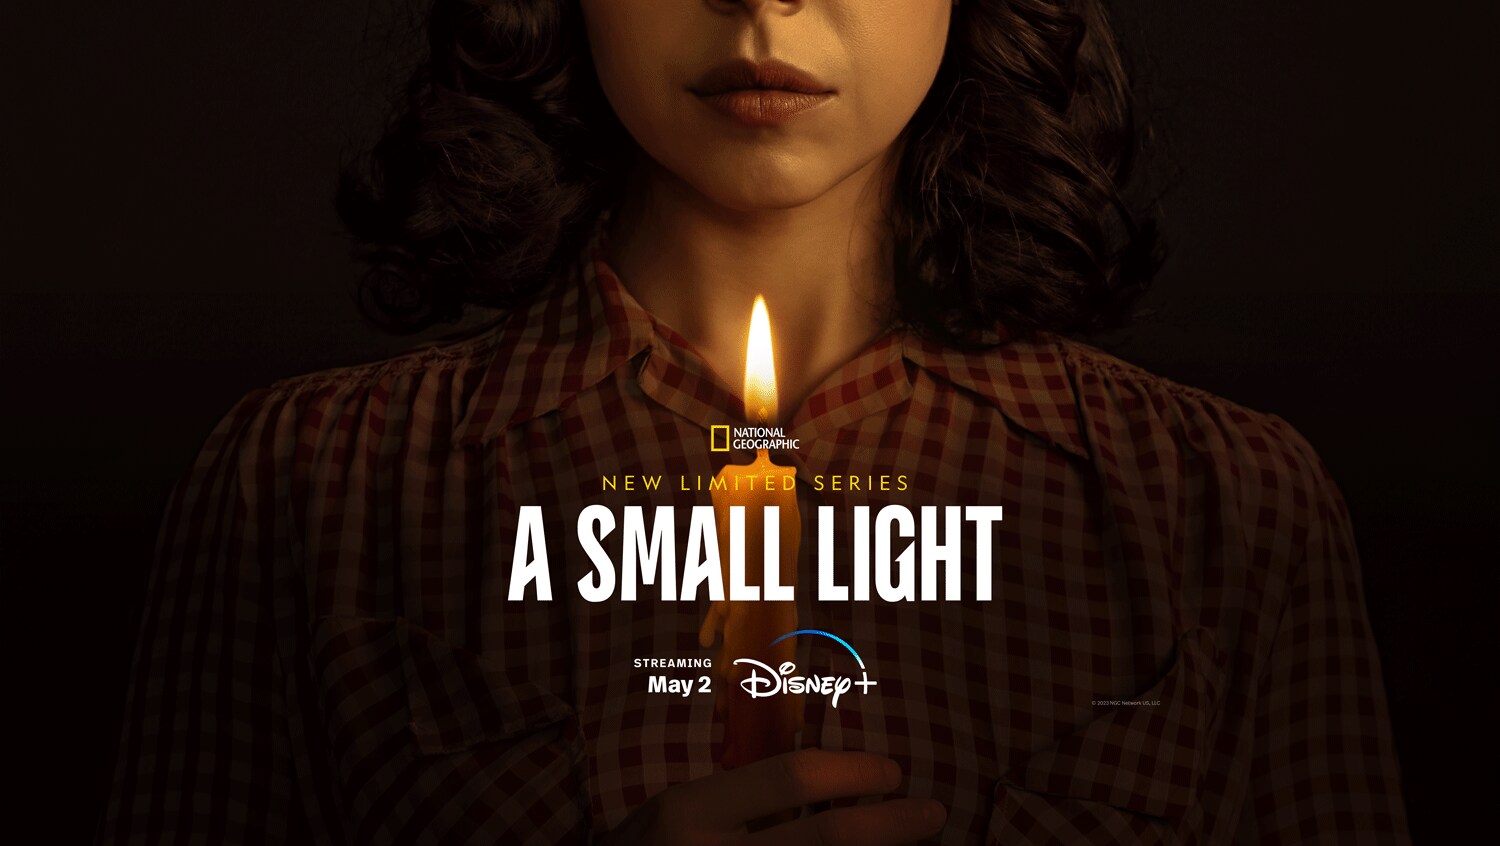 NATIONAL GEOGRAPHIC UNVEILS TRAILER FOR UPCOMING LIMITED SERIES A SMALL LIGHT, STARRING BEL POWLEY, JOE COLE AND LIEV SCHREIBER